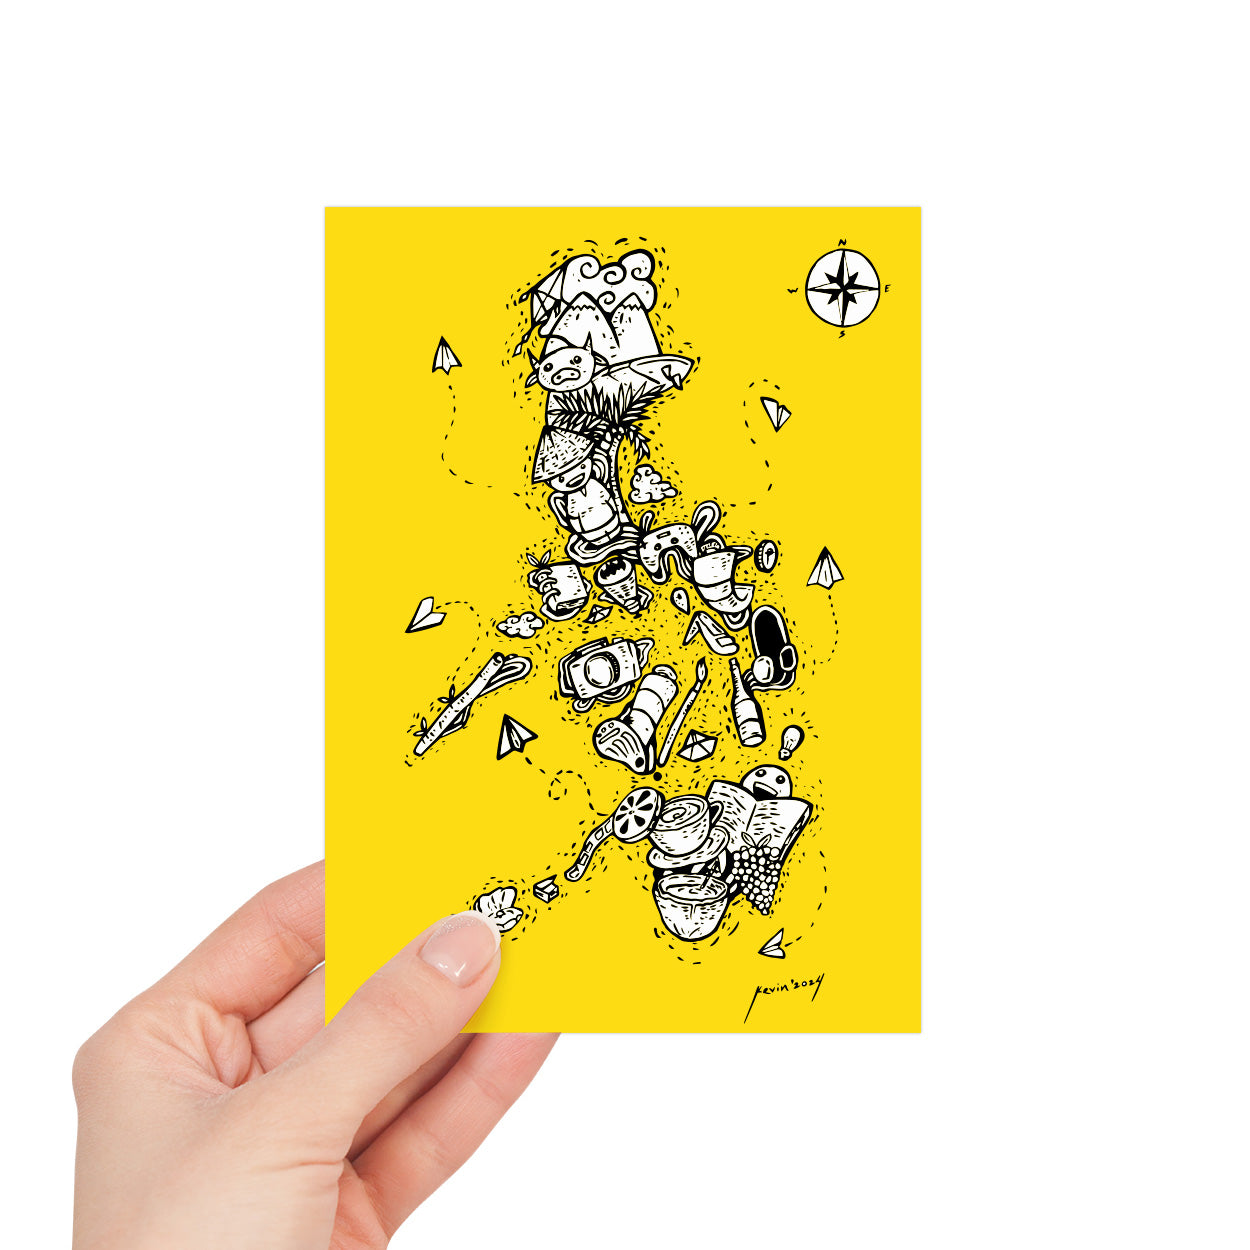 PH Map Doodle Drawing Hand Drawn Illustration Art Artsy Style Dumaguete city Artist Pinspired Art Souvenirs Yellow Black and White Snailmail Postcrossing PHL Post actual size